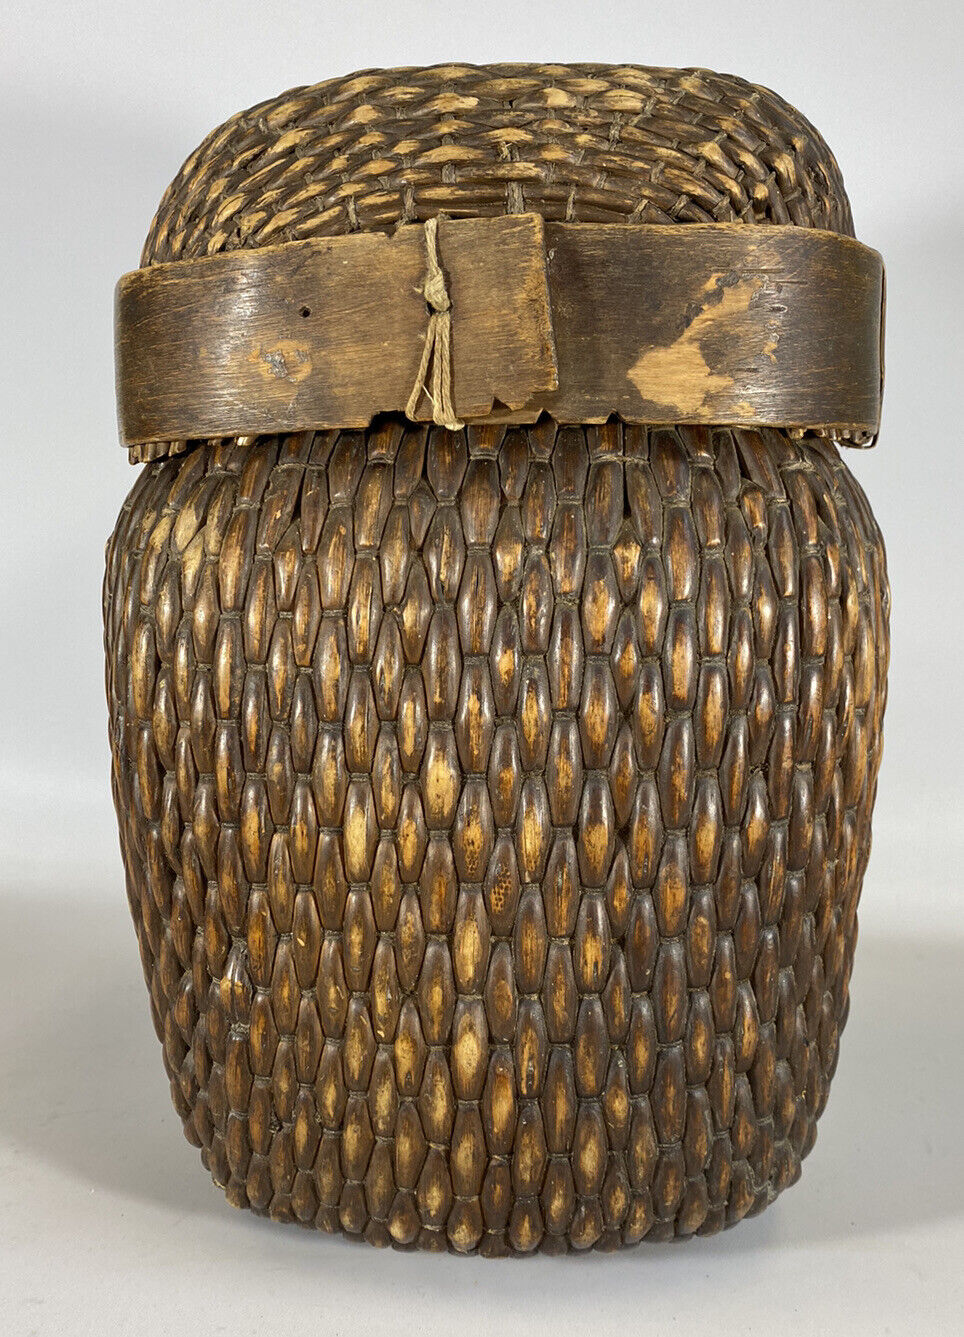 Antique Chinese 12” Fish Basket 1920s Willow Wood With Lid Vintage Container